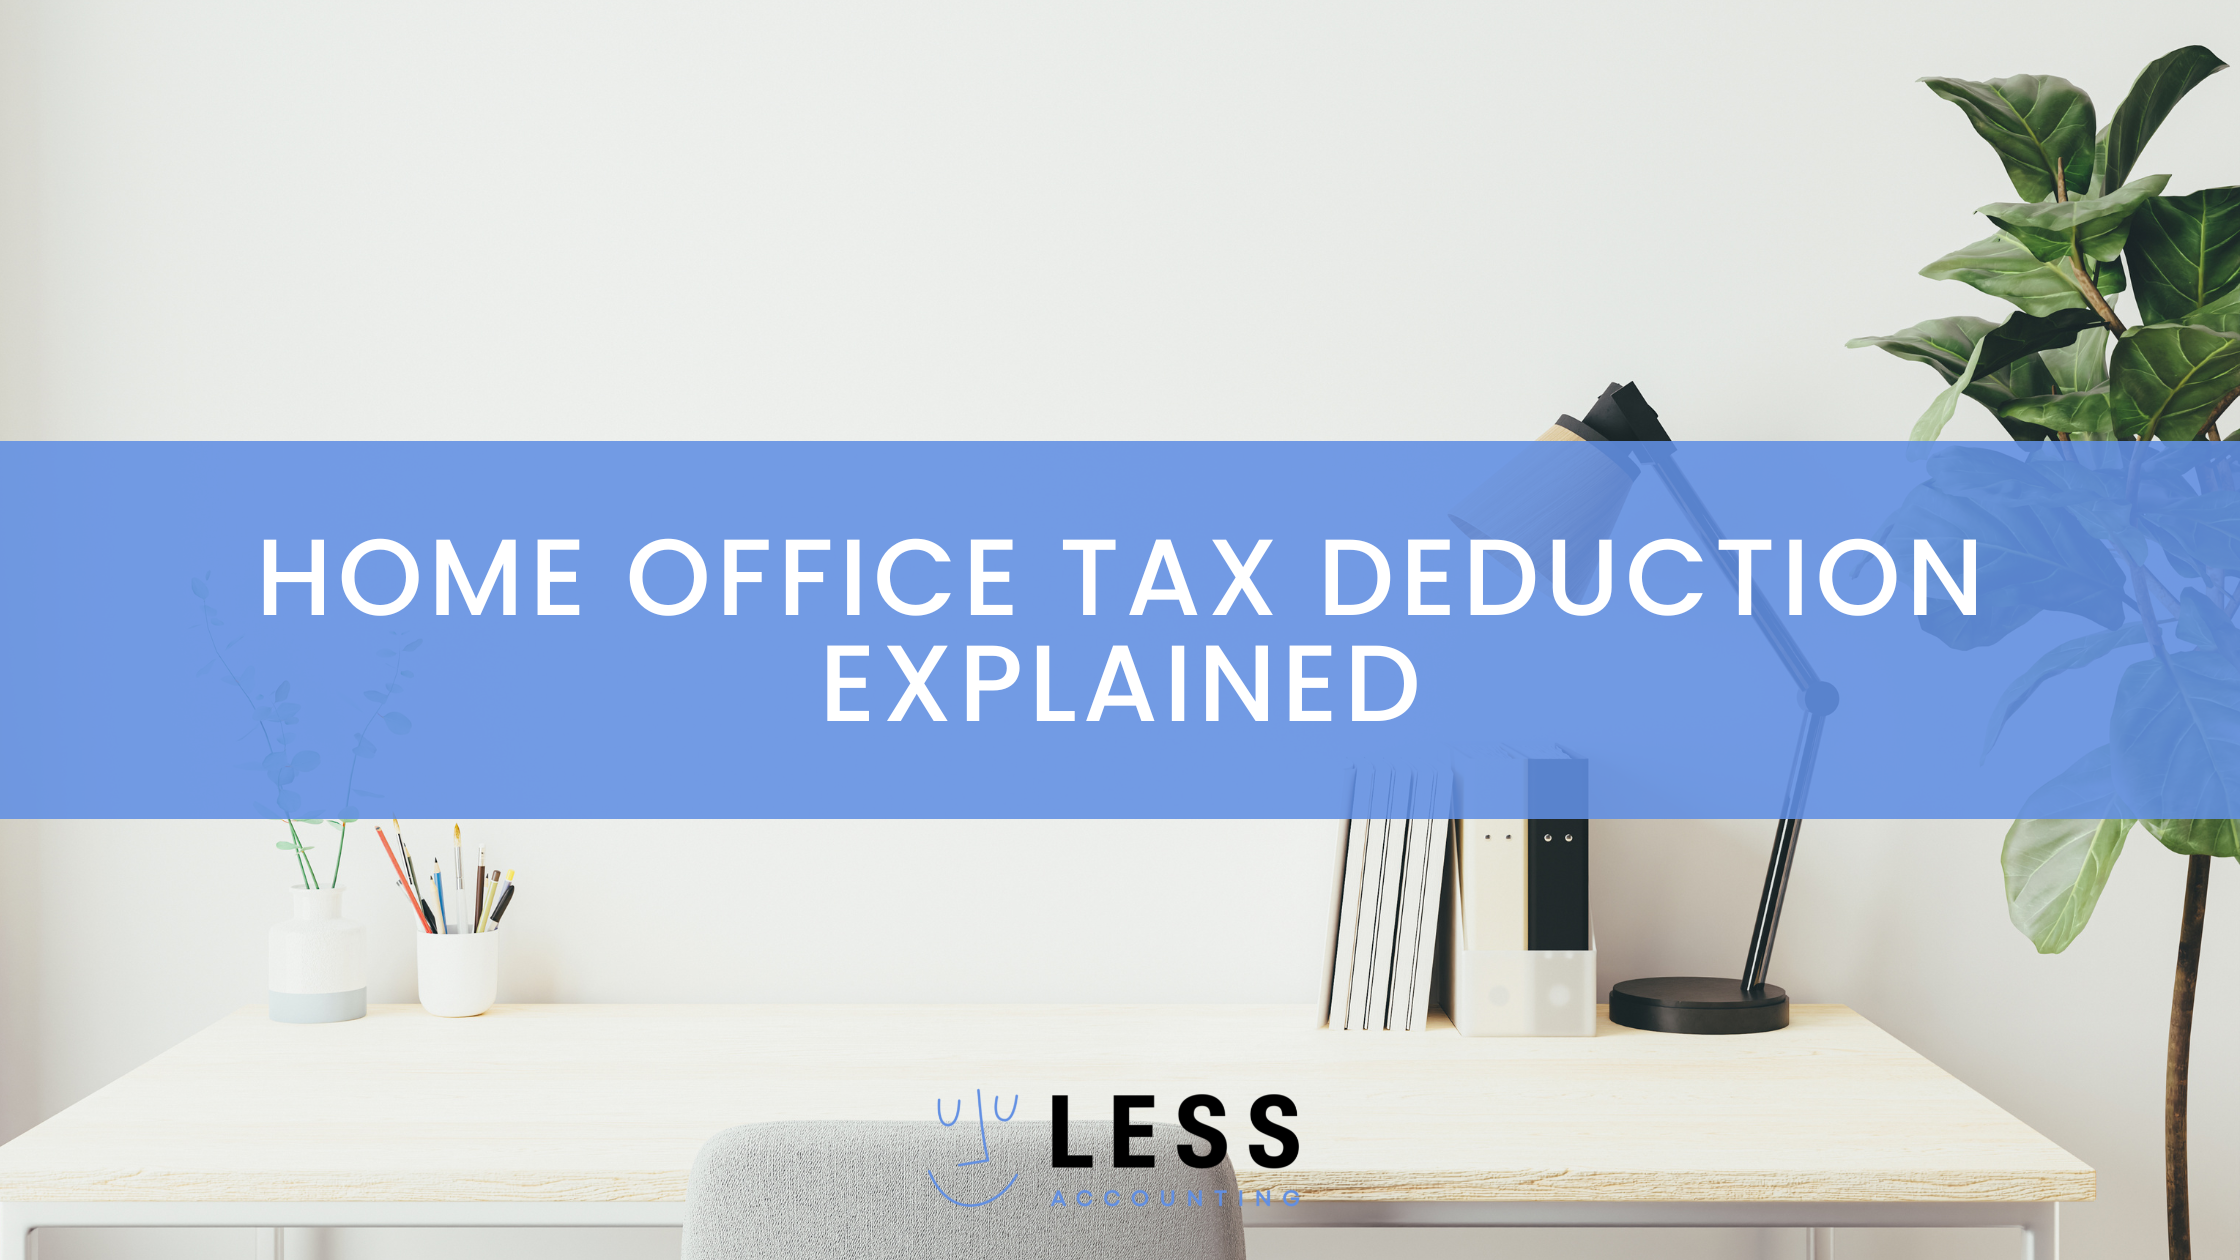 Home Office Tax Deduction Explained